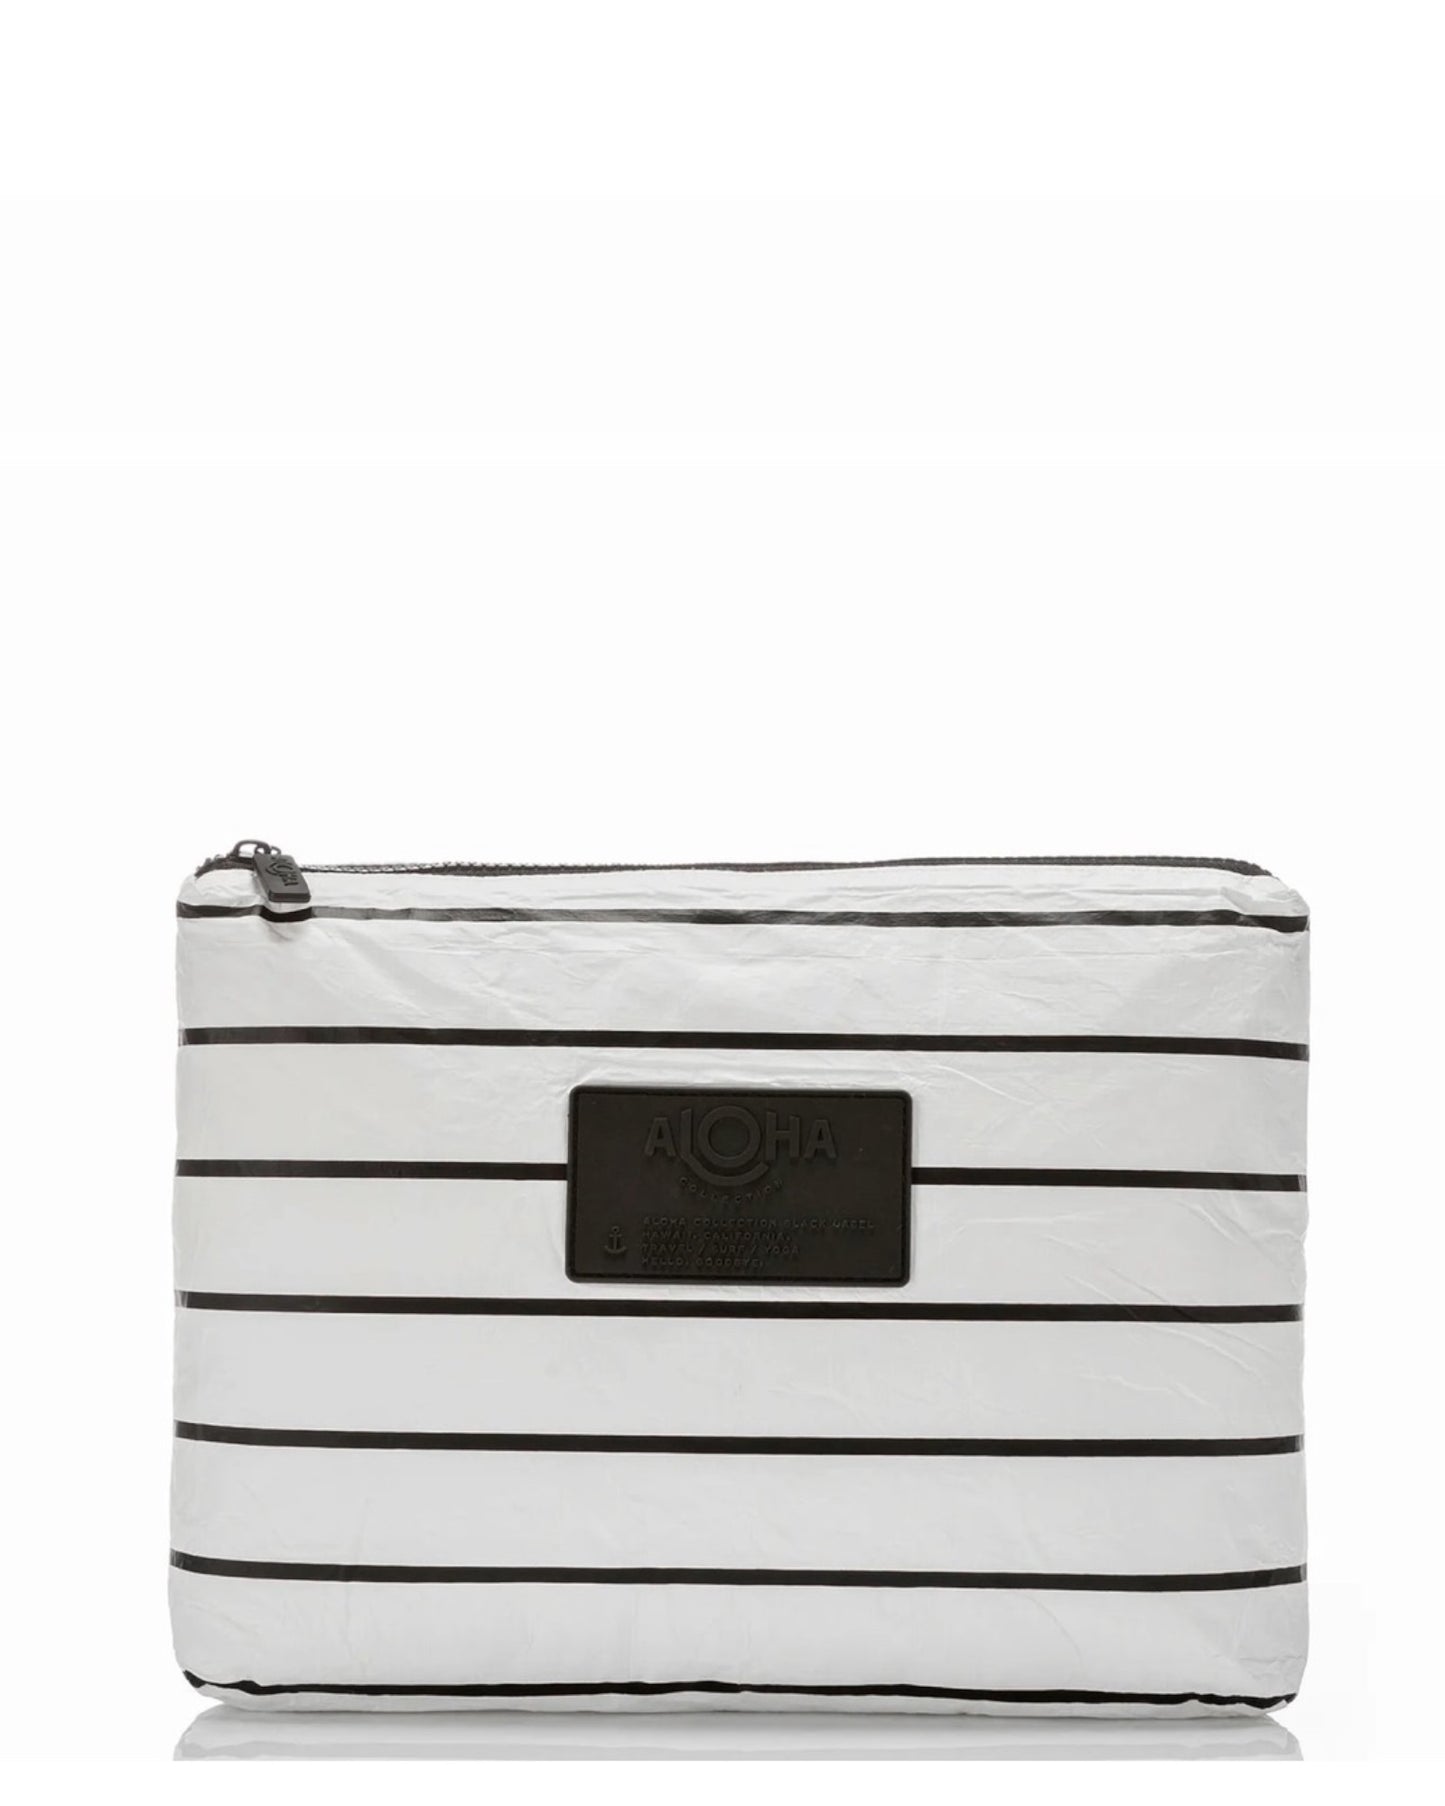 Aloha Collection Mid Pouch Pinstripe Black on White